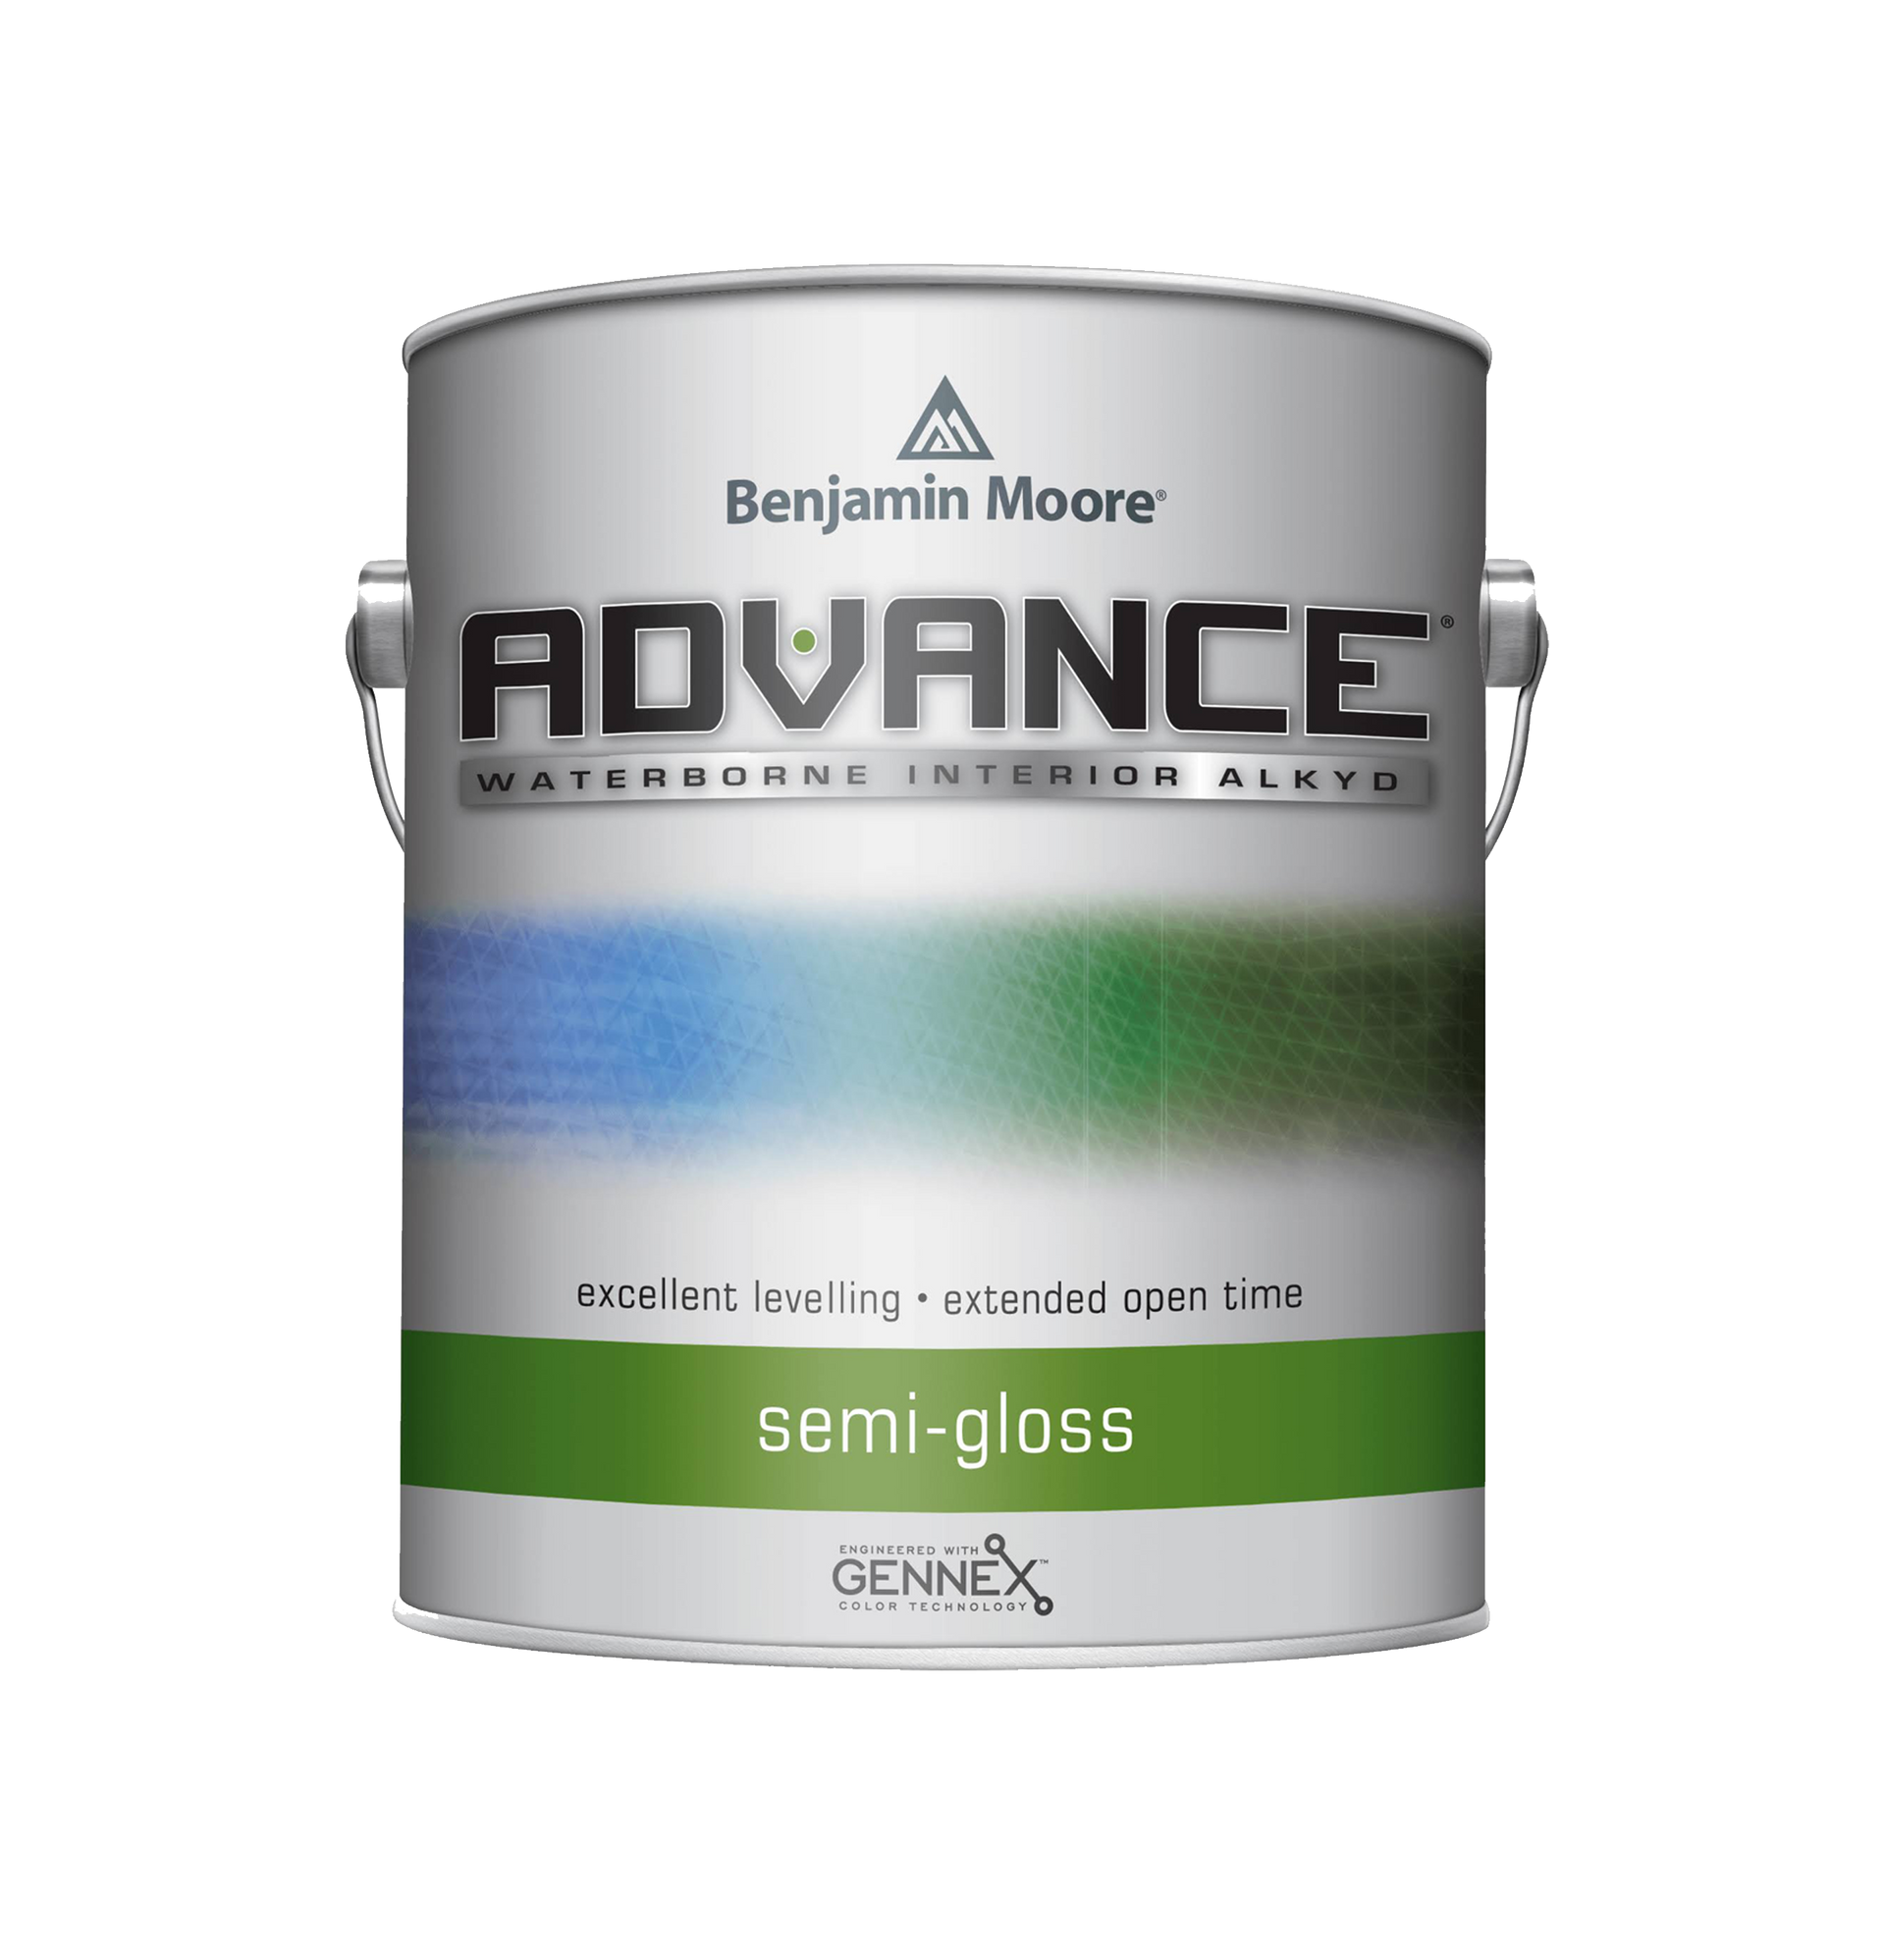 Image of can of ADVANCE® Interior Paint